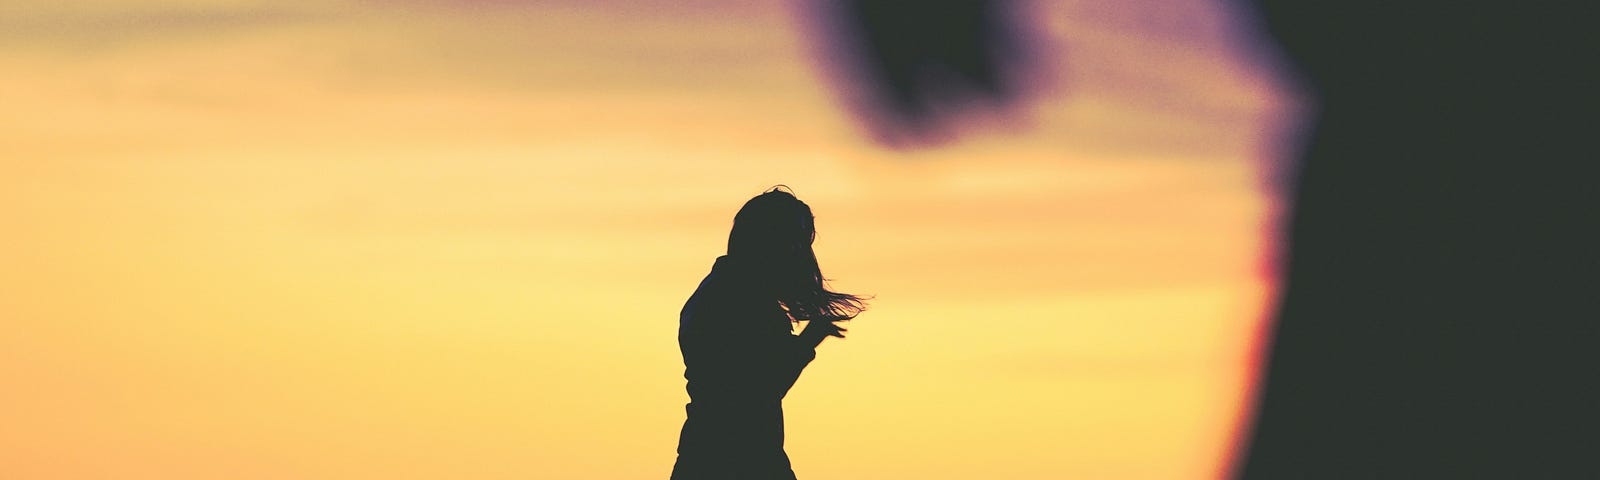 A apprehensive woman’s silhouette standing on a beach at sunset with an ominous figure in the forefront.